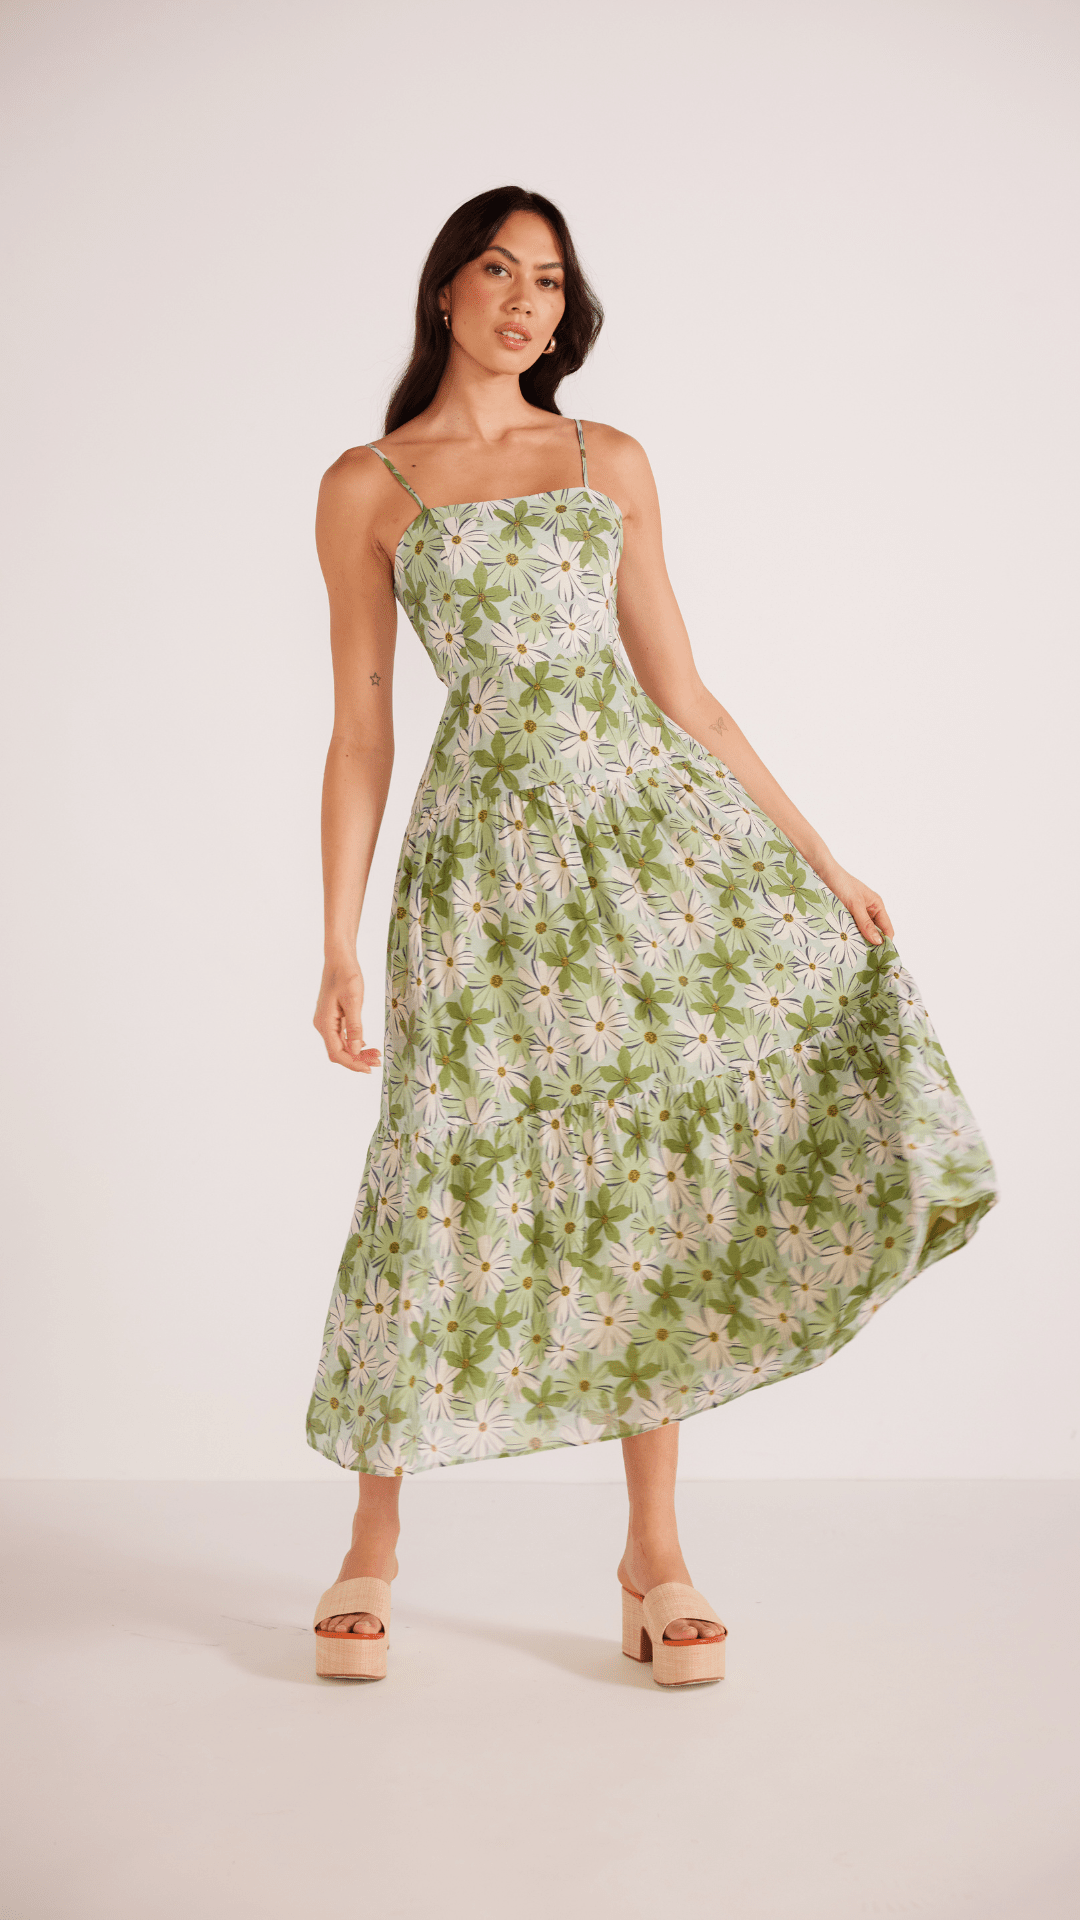 MINK PINK - MARGAUX MAXI DRESS - Green/White Floral ***PRE ORDER / DUE APPROX 22FEB*** Womens MINK PINK